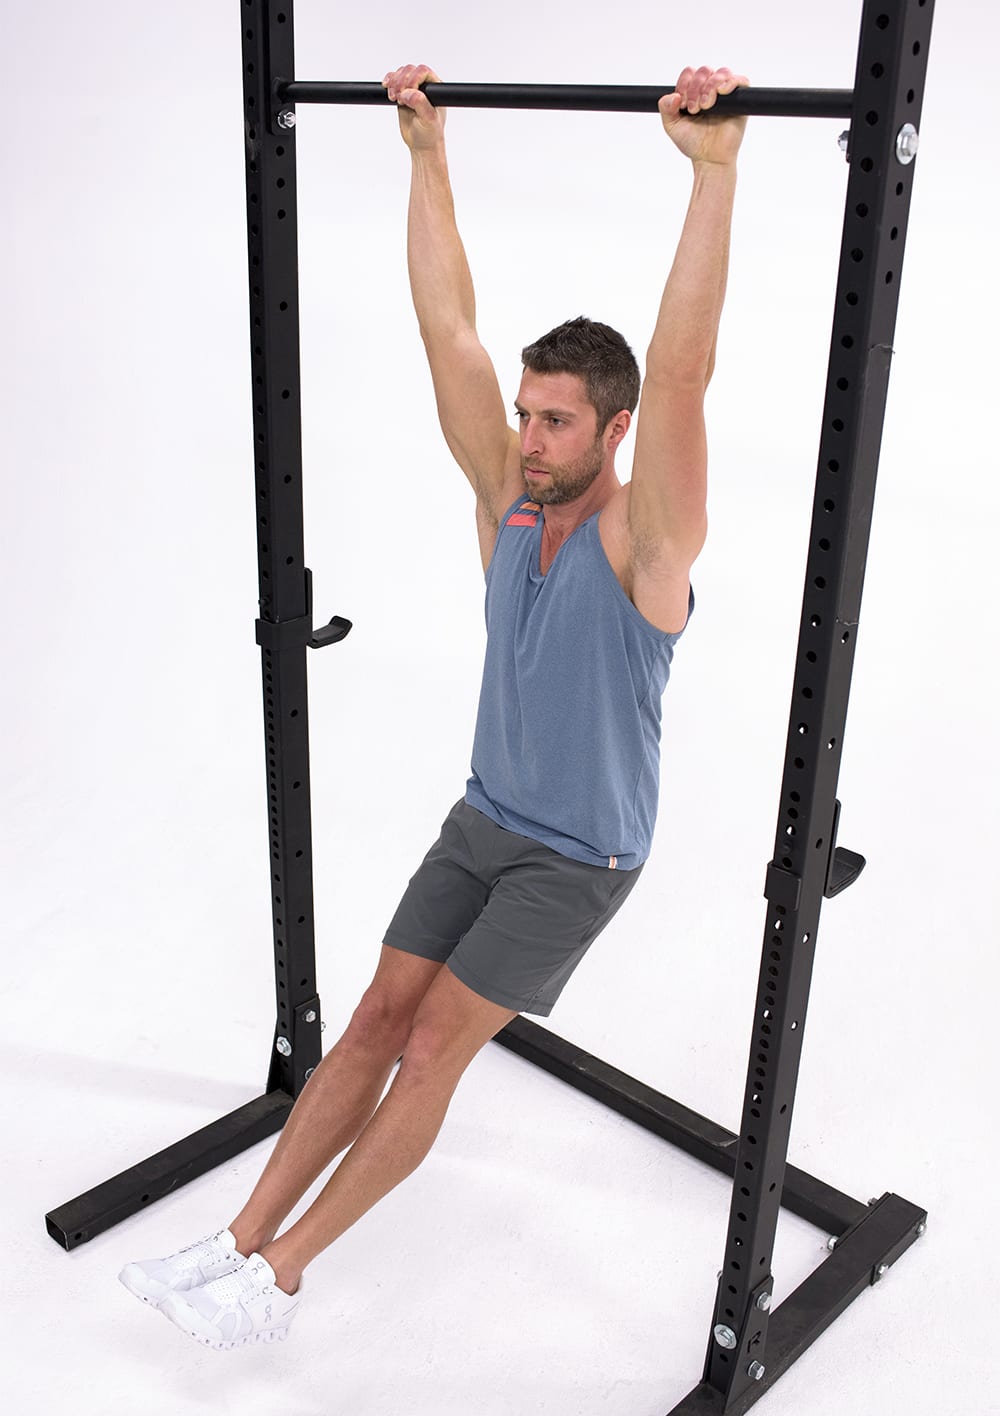 Man Does Hollow Body Hold | Isometric Exercise